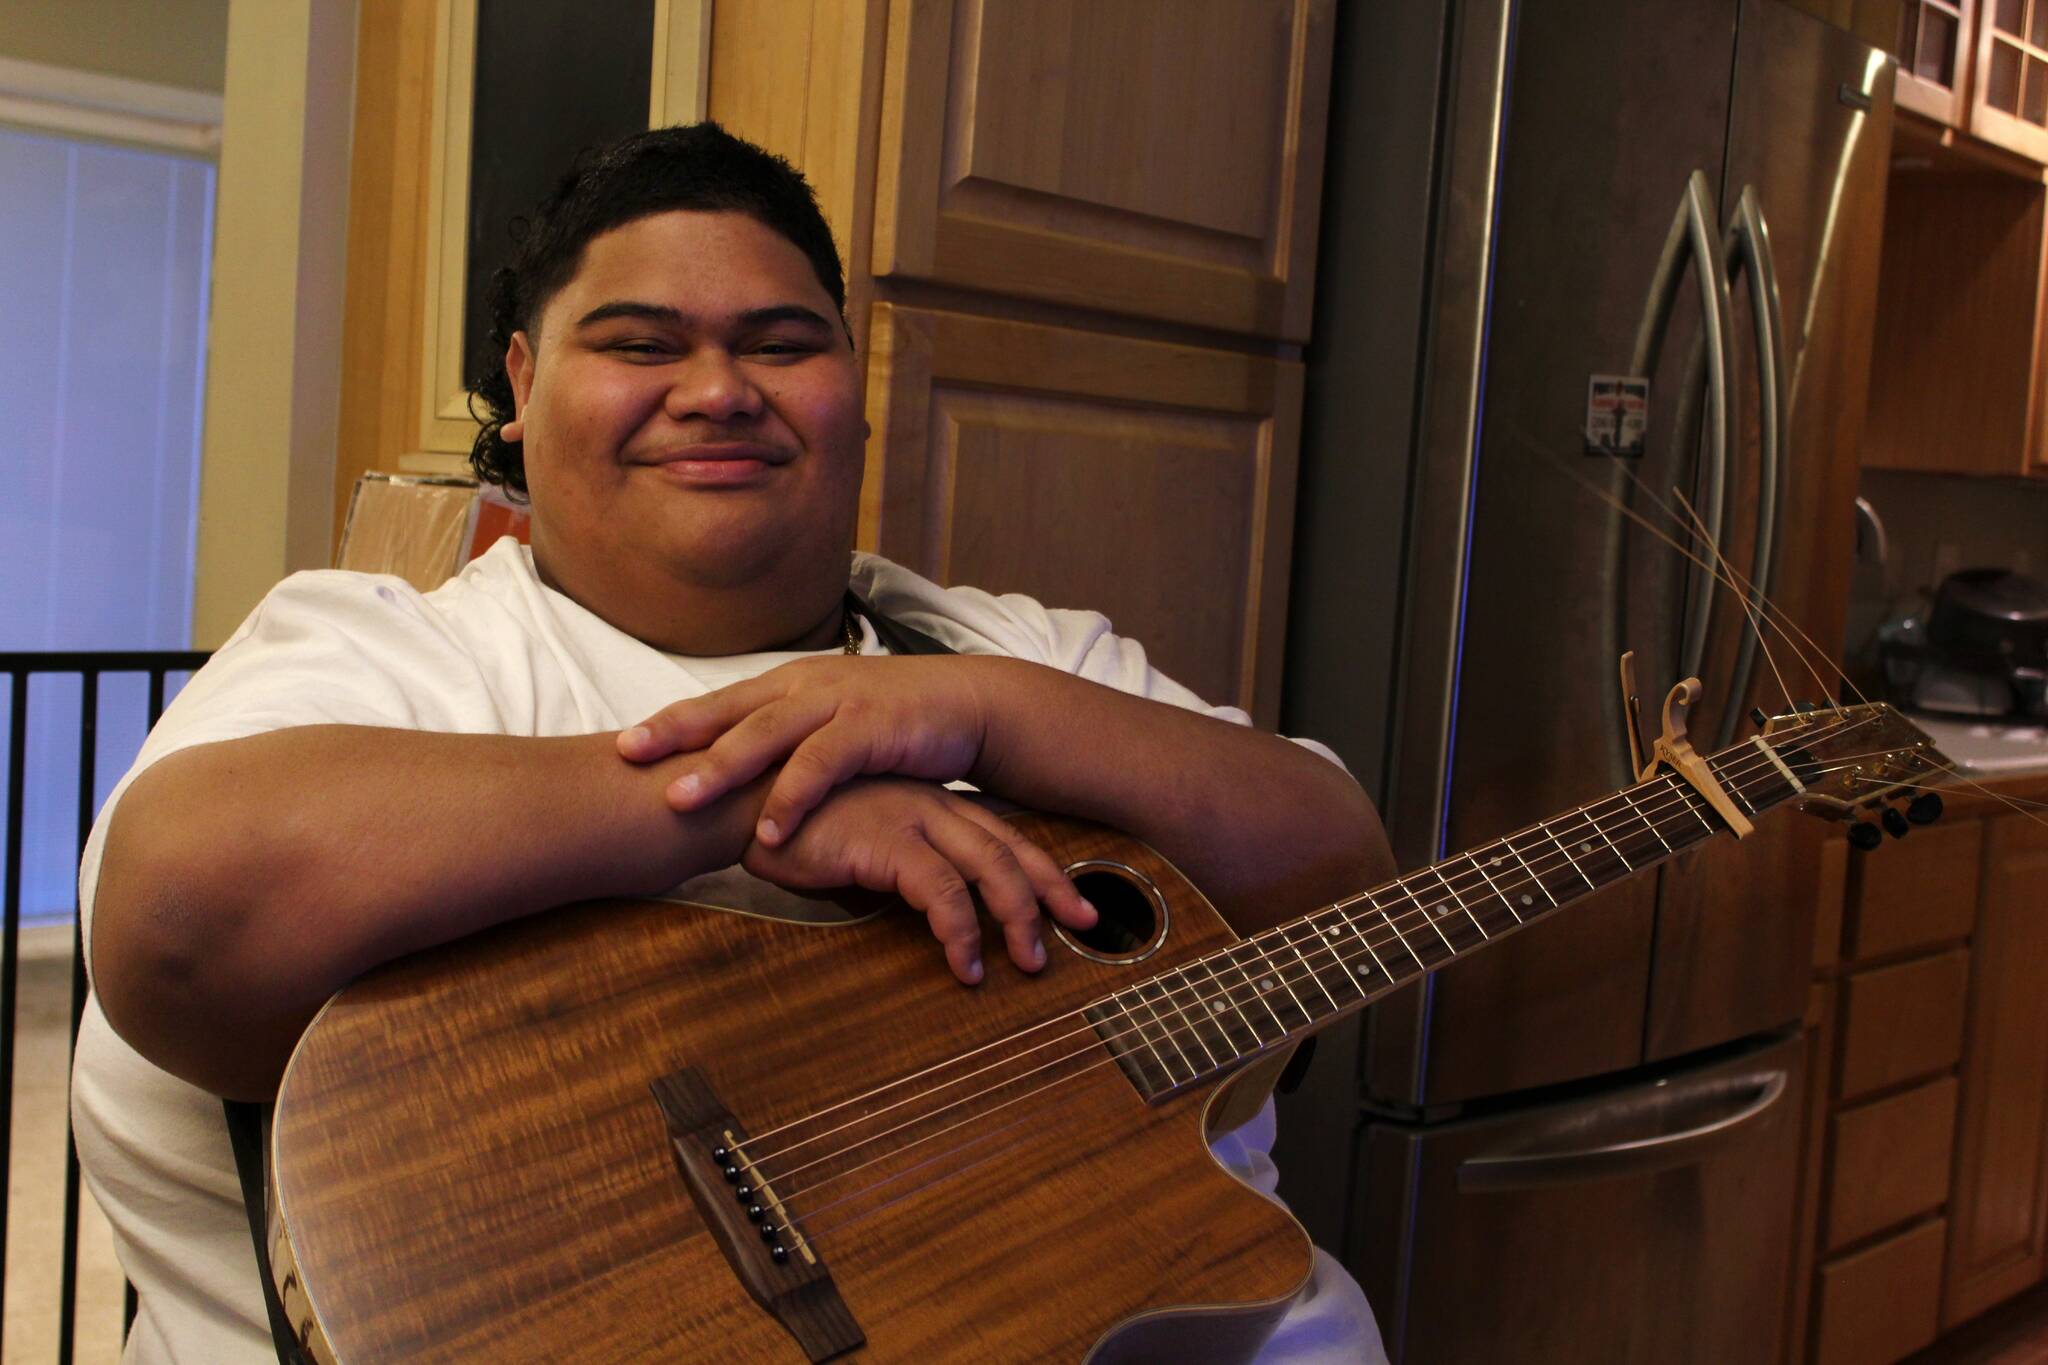 Decatur High School senior and “American Idol” contestant Iam Tongi sits at home on March 1. His father Rodney spent a bonus from his job as an electrician to buy Iam’s guitar. Tongi went on to win this year’s season of “American Idol.” (Alex Bruell / The Mirror)